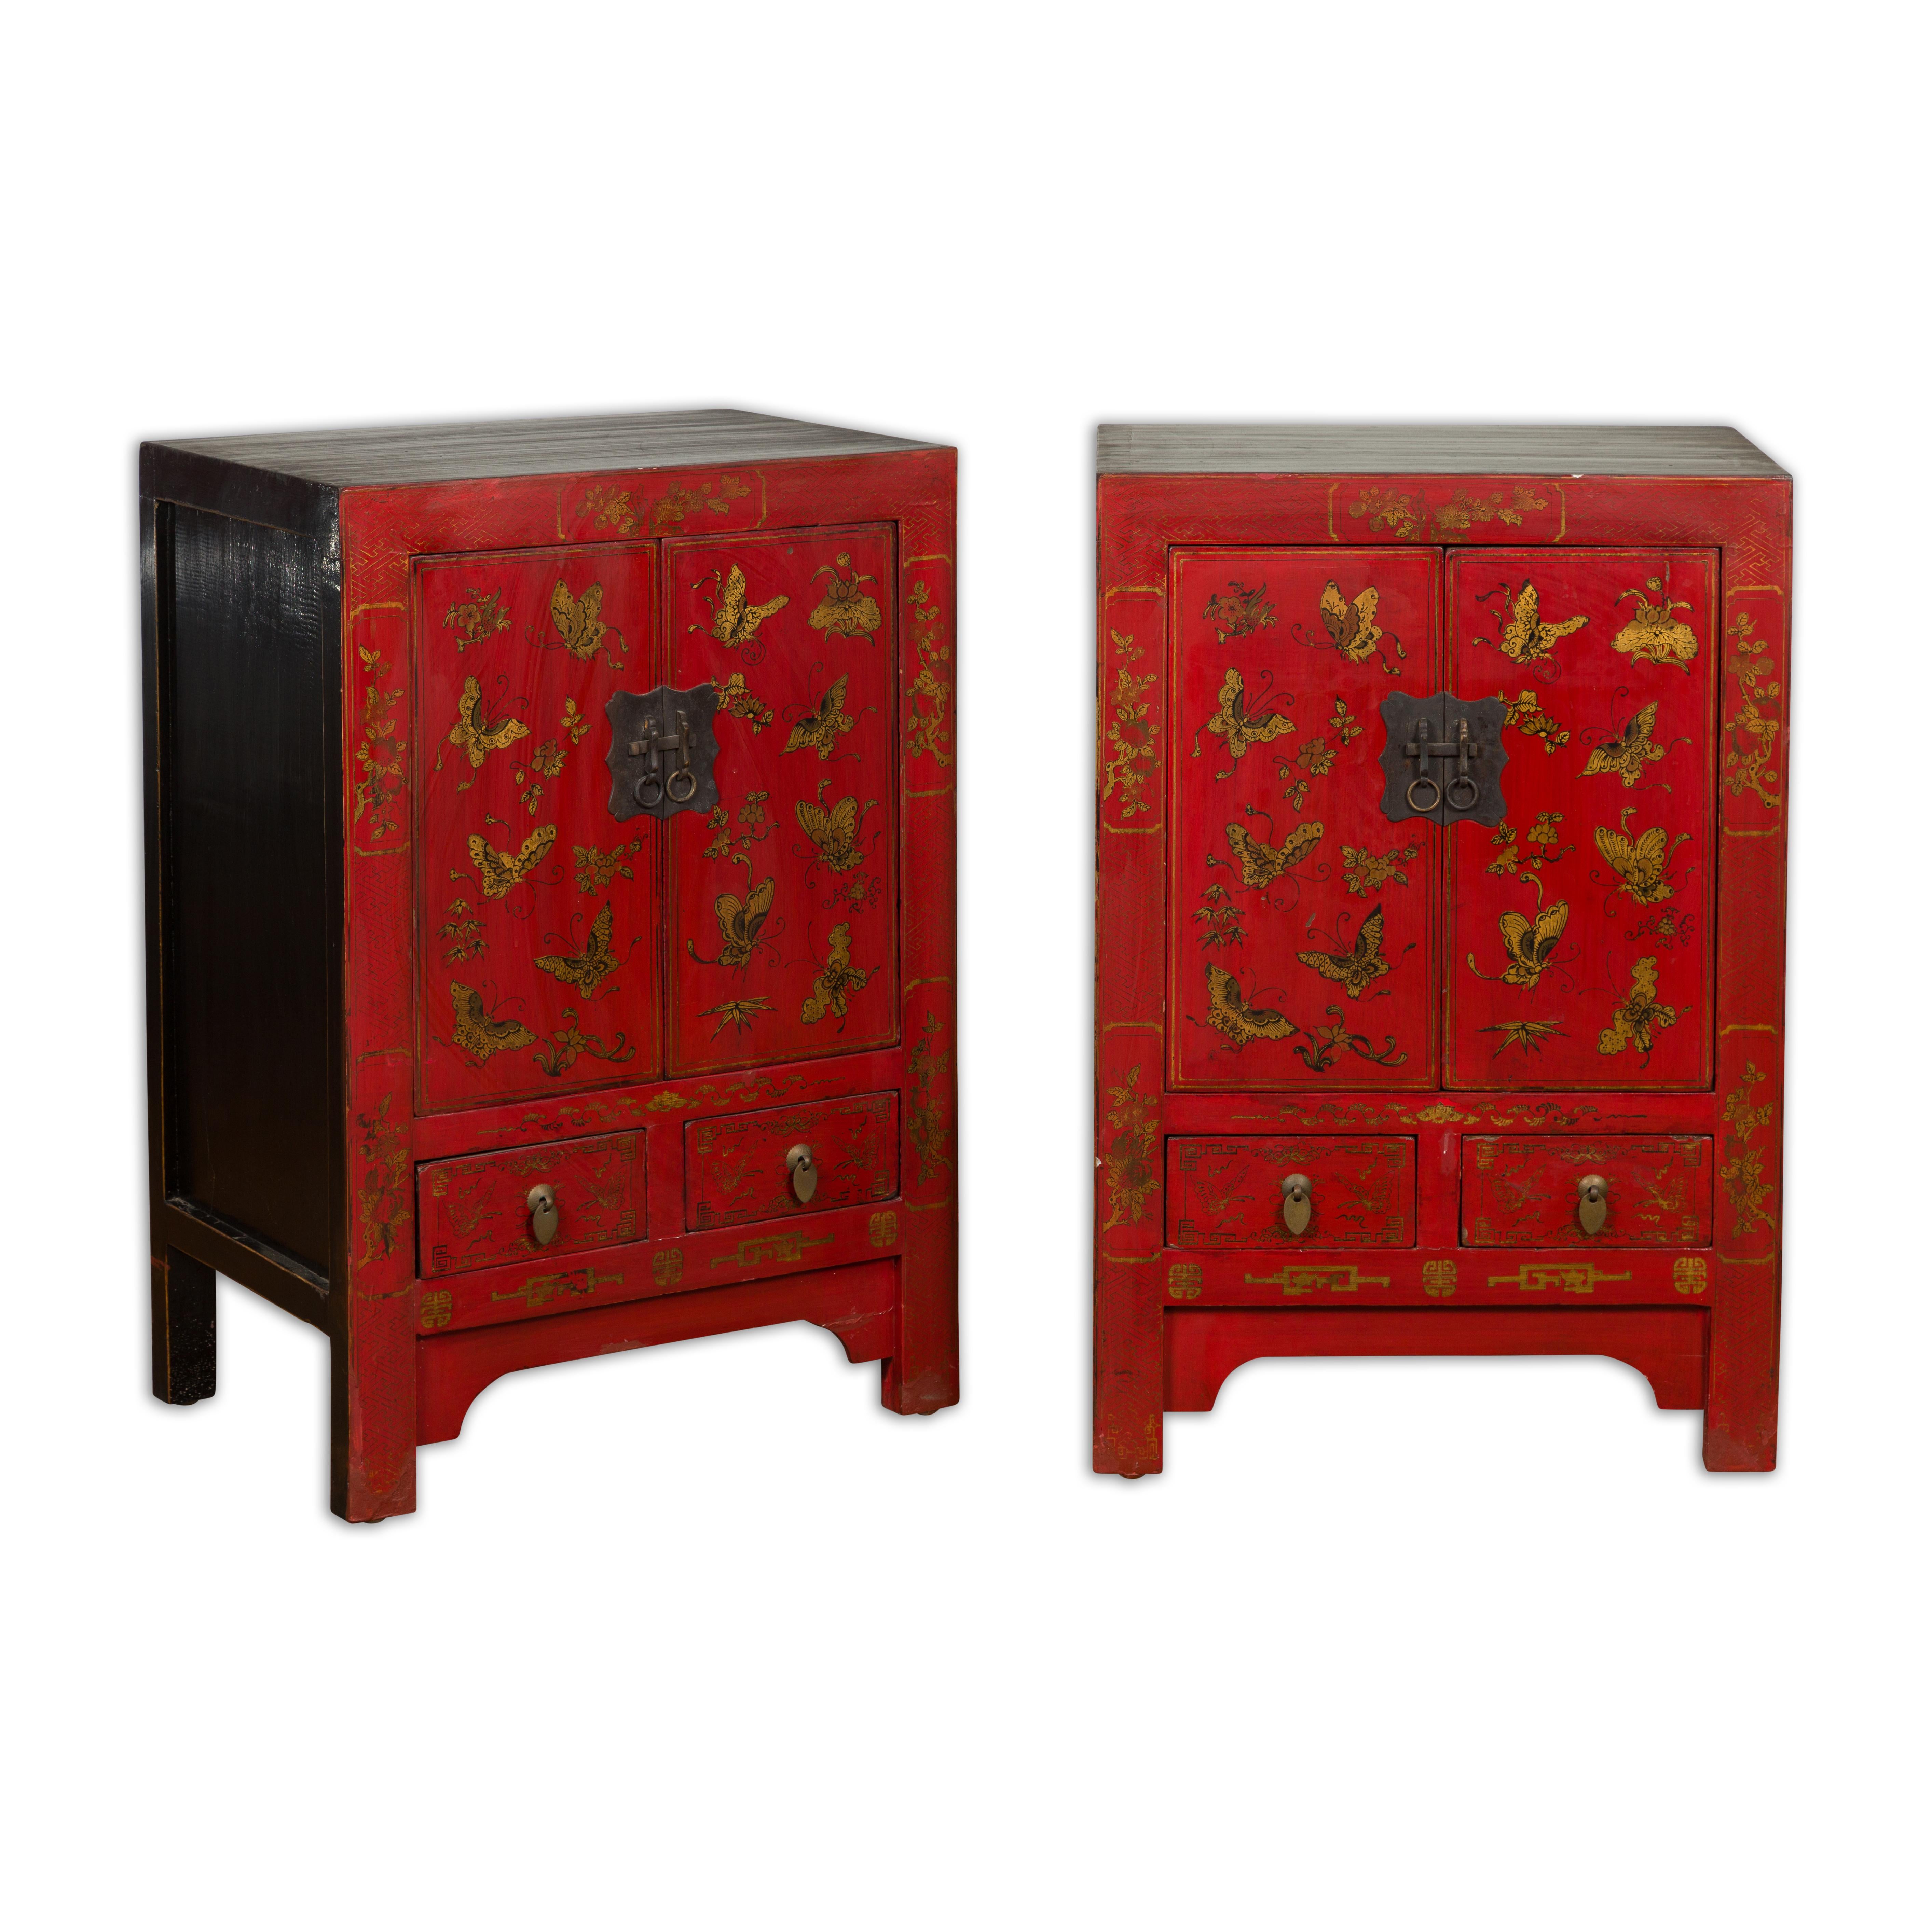 Pair of Chinese Qing Dynasty Red Lacquer Bedside Cabinets with Butterfly Décor 10